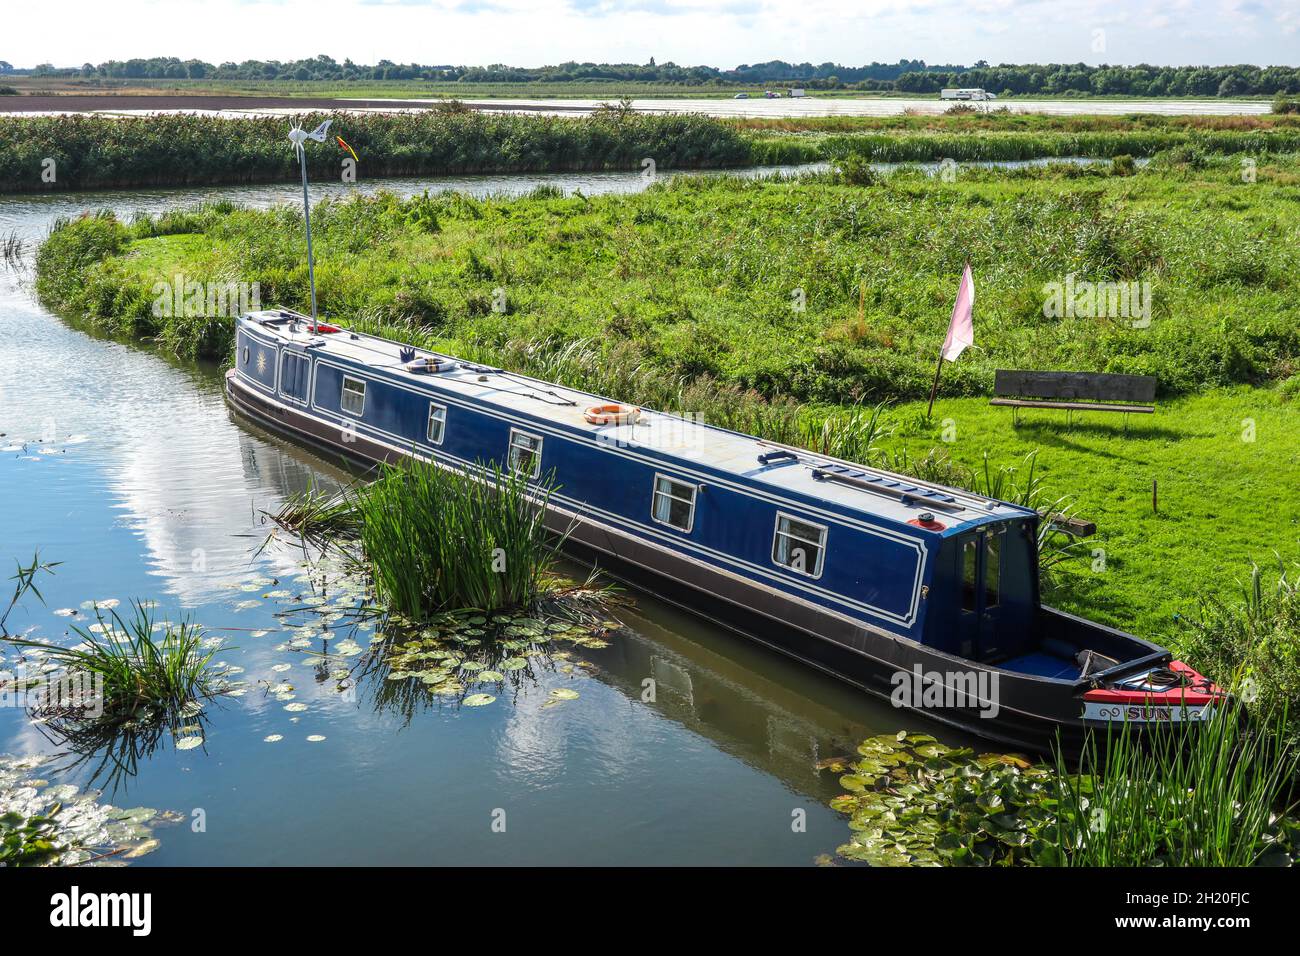 Narrowboat moored in a remote part of the Great Ouse River near Ely Cambridgeshire England Stock Photo